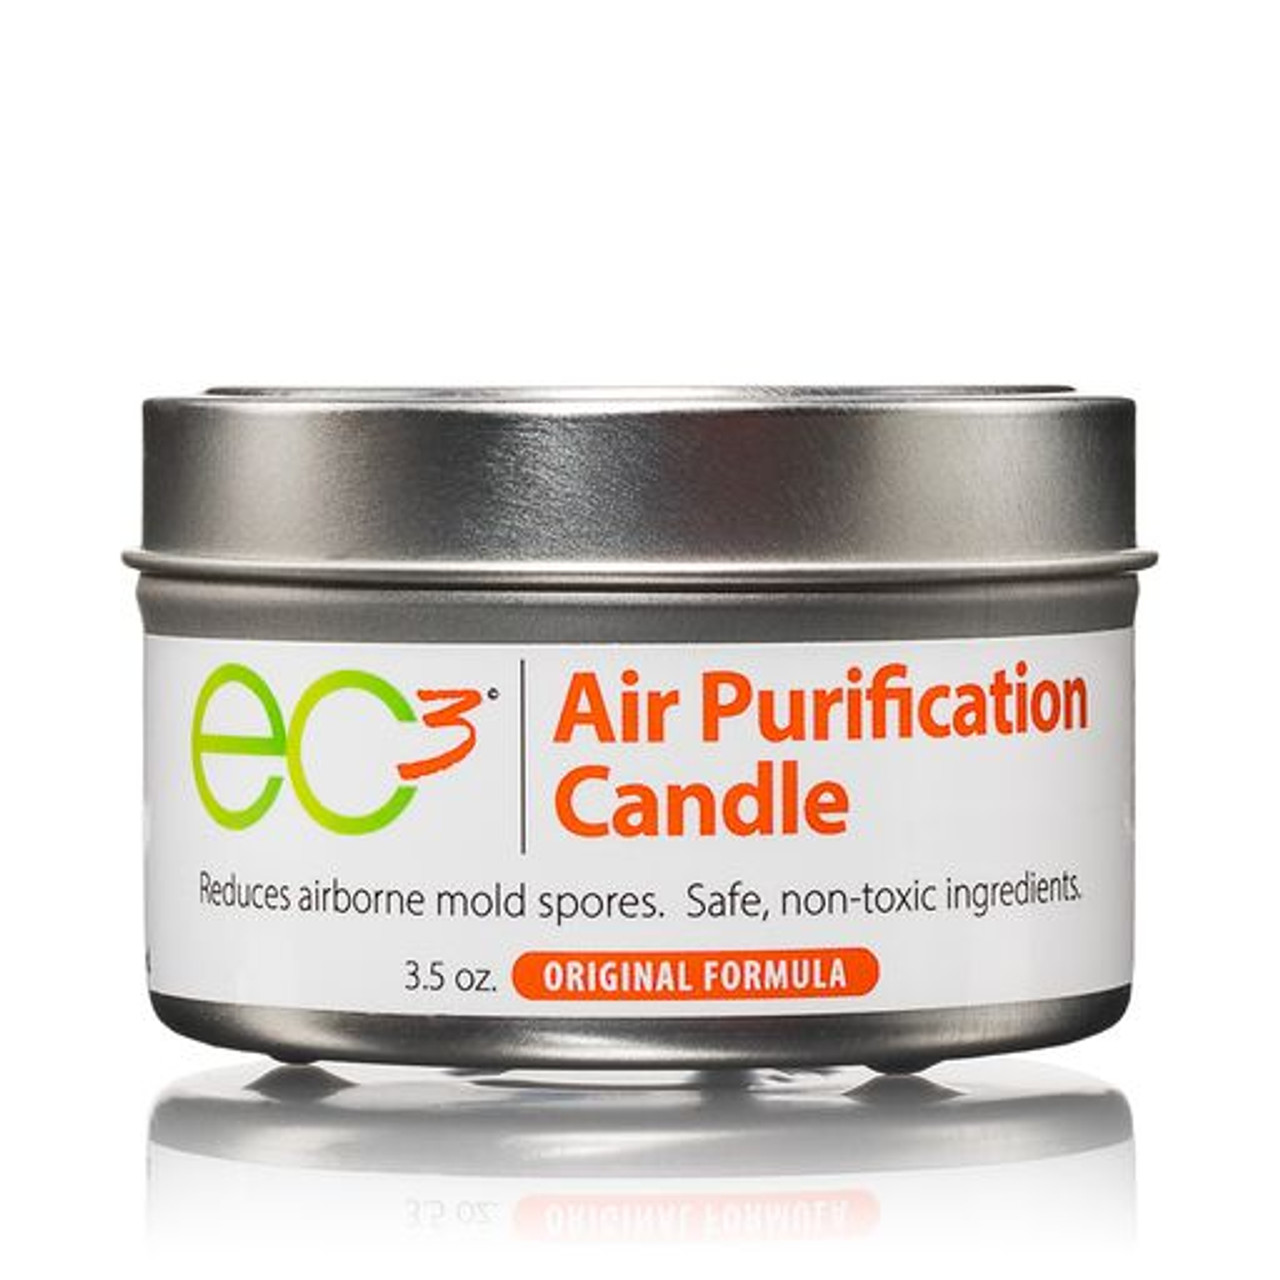 Micro Balance Health Products EC3 Air Purification Candle - 3.5 oz